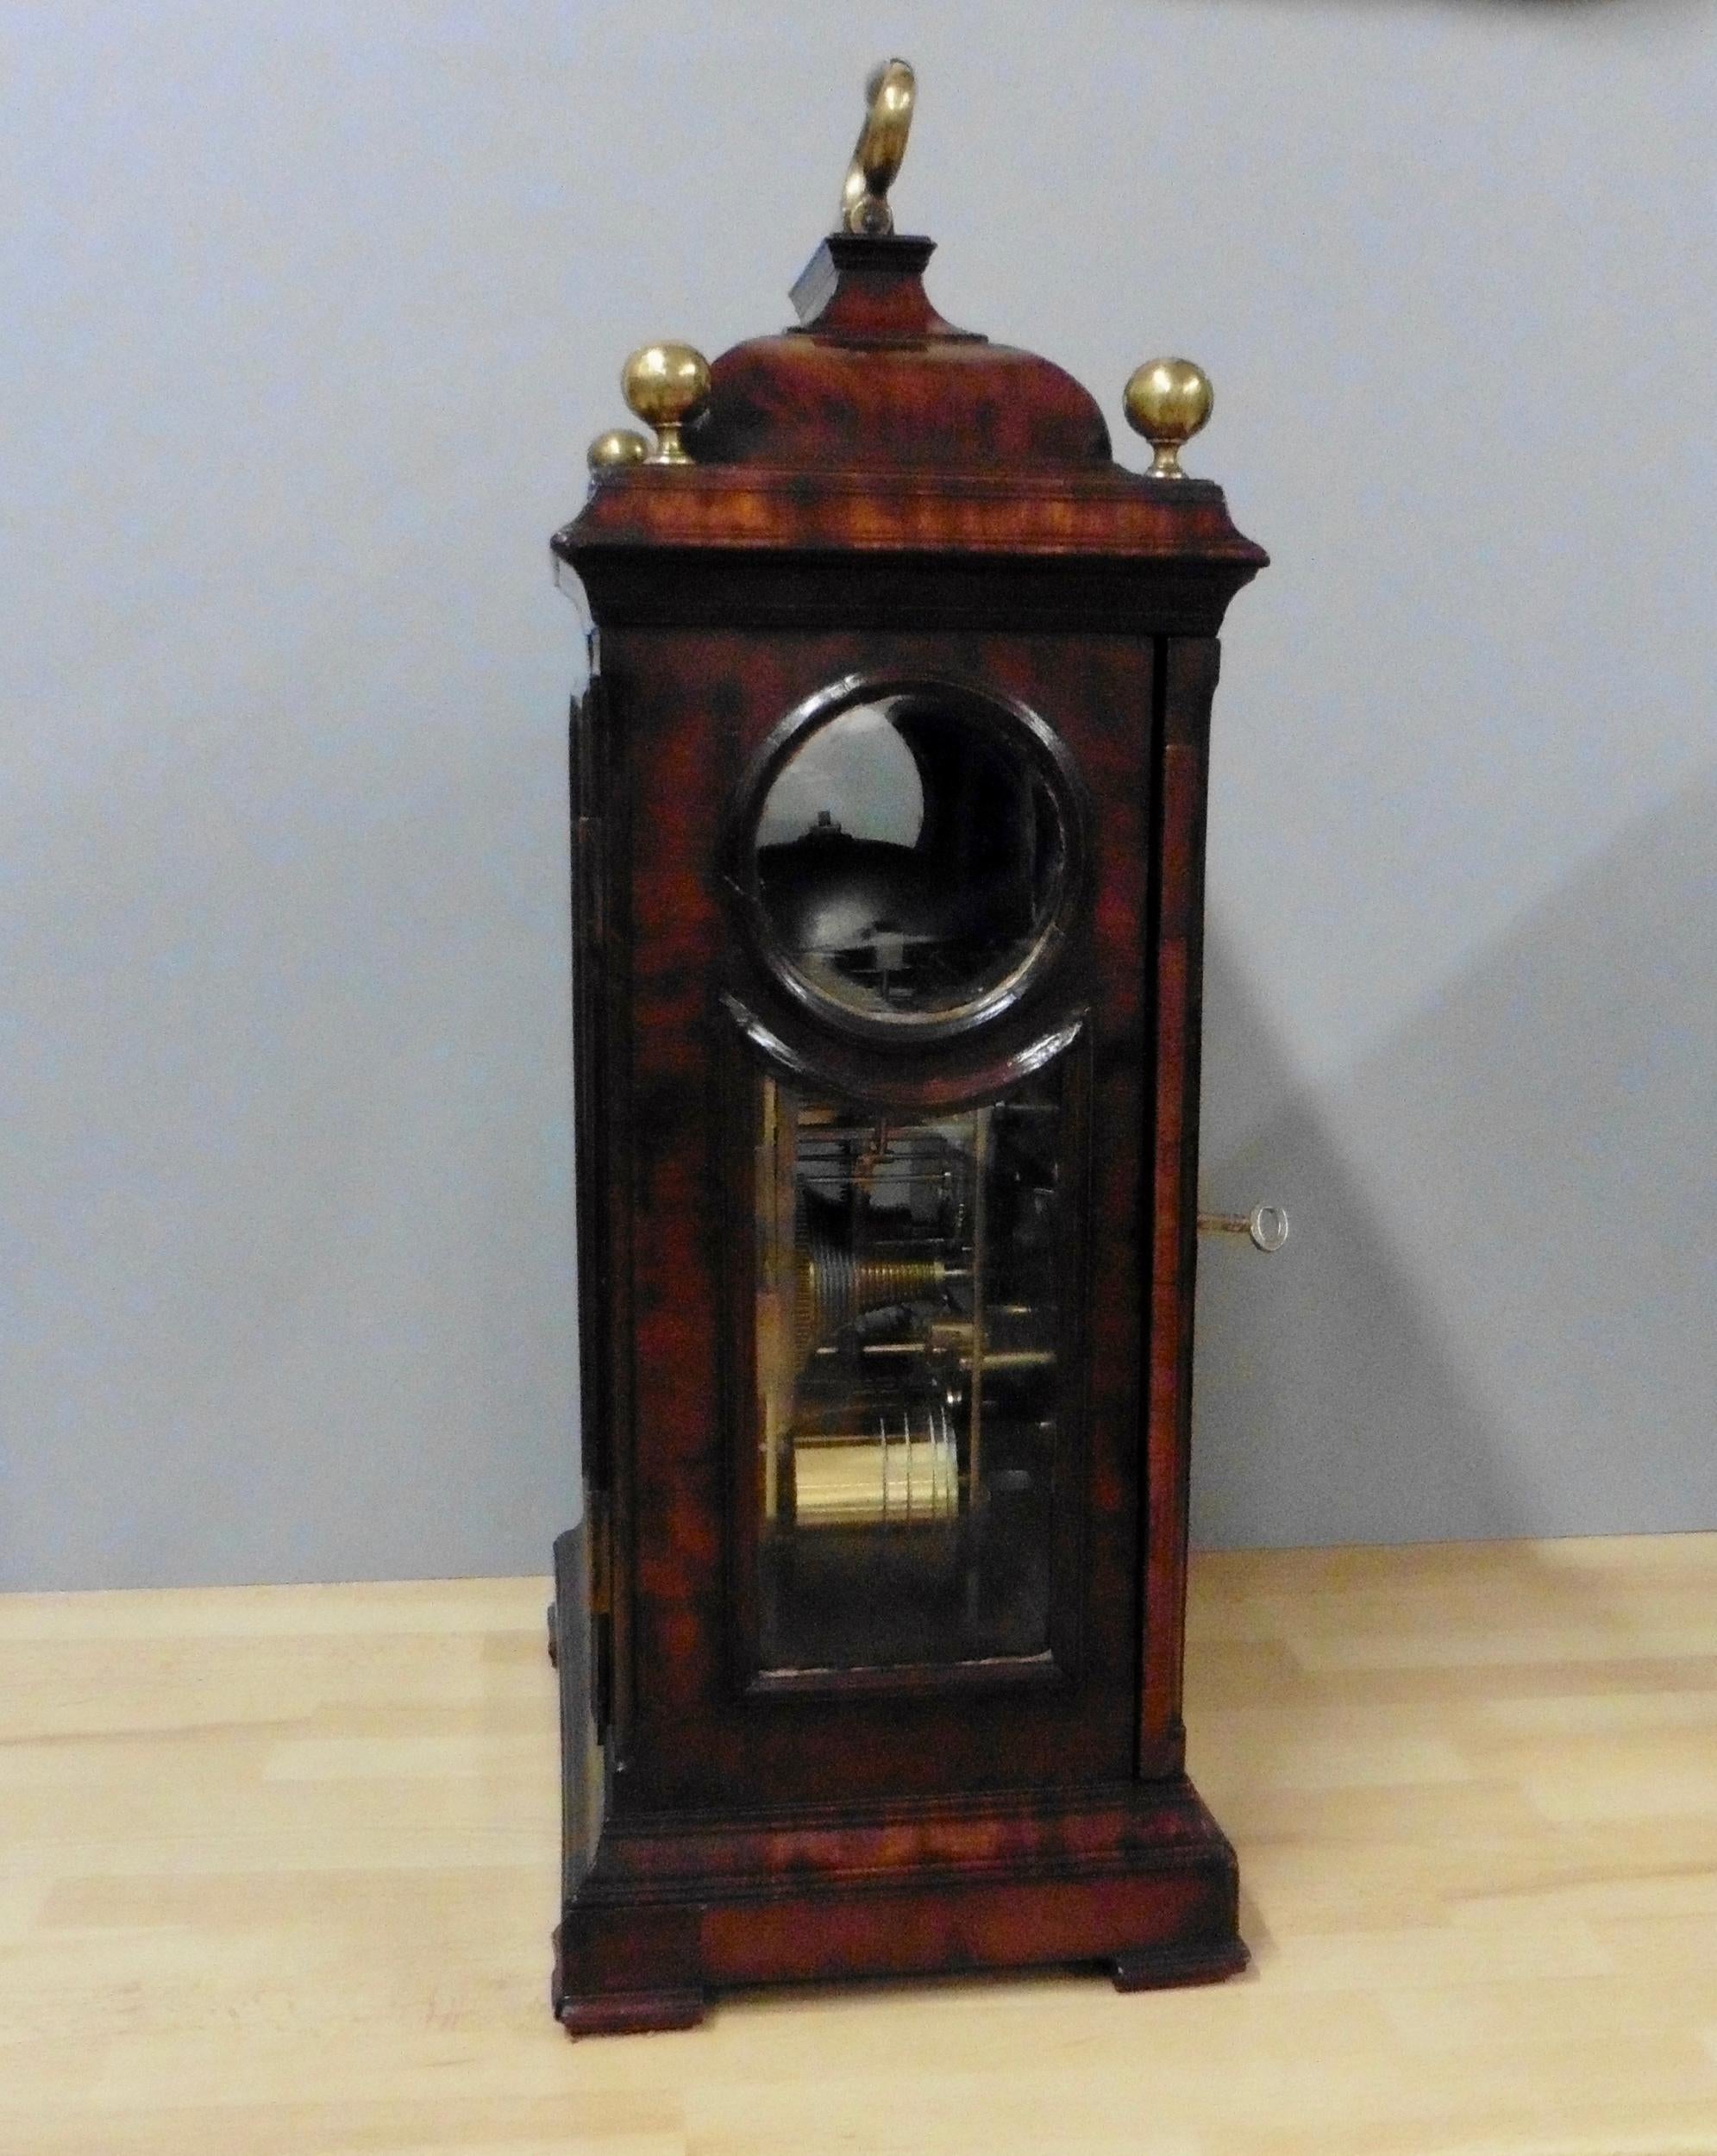 George III Mahogany Bell Top Bracket Clock With Verge Escapement by H.Thomas In Good Condition For Sale In Norwich, GB